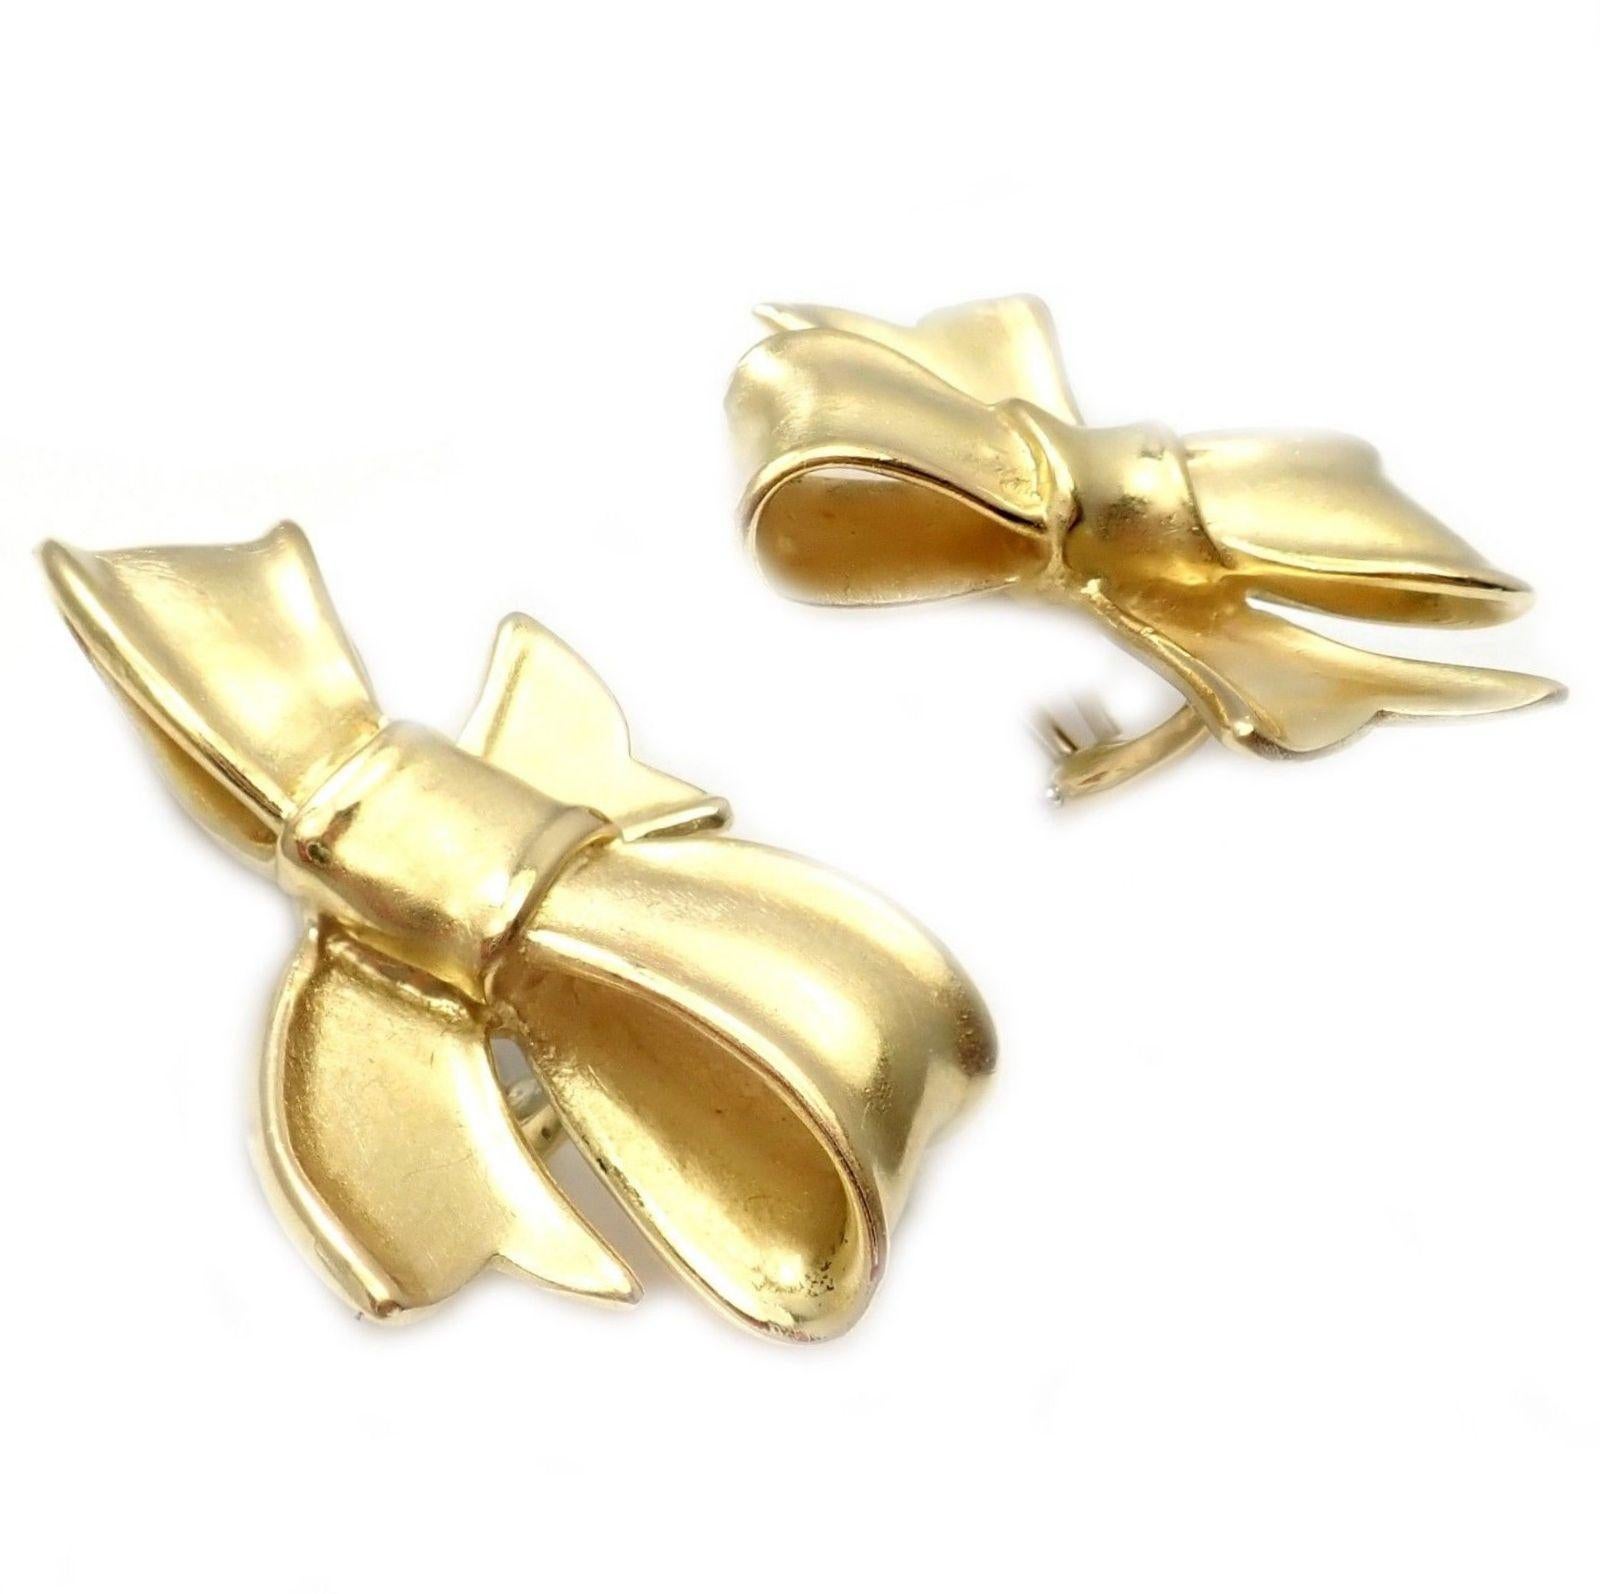 18k Yellow Gold Bow Earrings by Angela Cummings. 
From 1984. 
Details: 
Weight: 27.6 grams
Measurements: 35mm x 23mm
Stamped Hallmarks: 1984 Cummings 18k
These earrings are for pierced ears.
*Free Shipping within the United States*
YOUR PRICE: